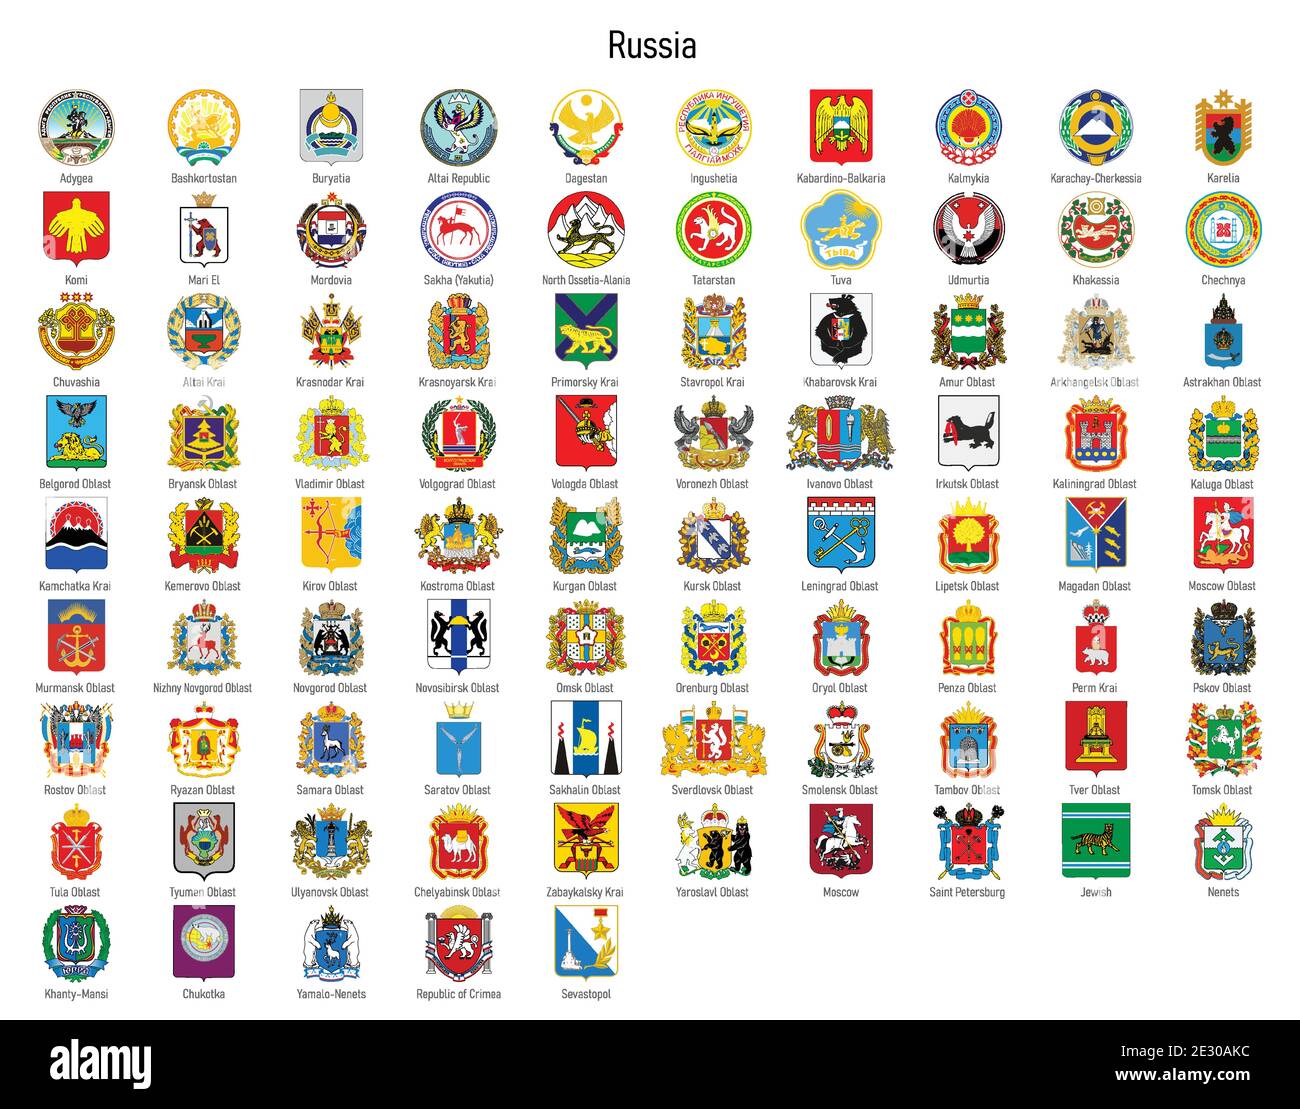 Coat of arms of the oblast of Russia, All Russian regions emblem collection Stock Vector